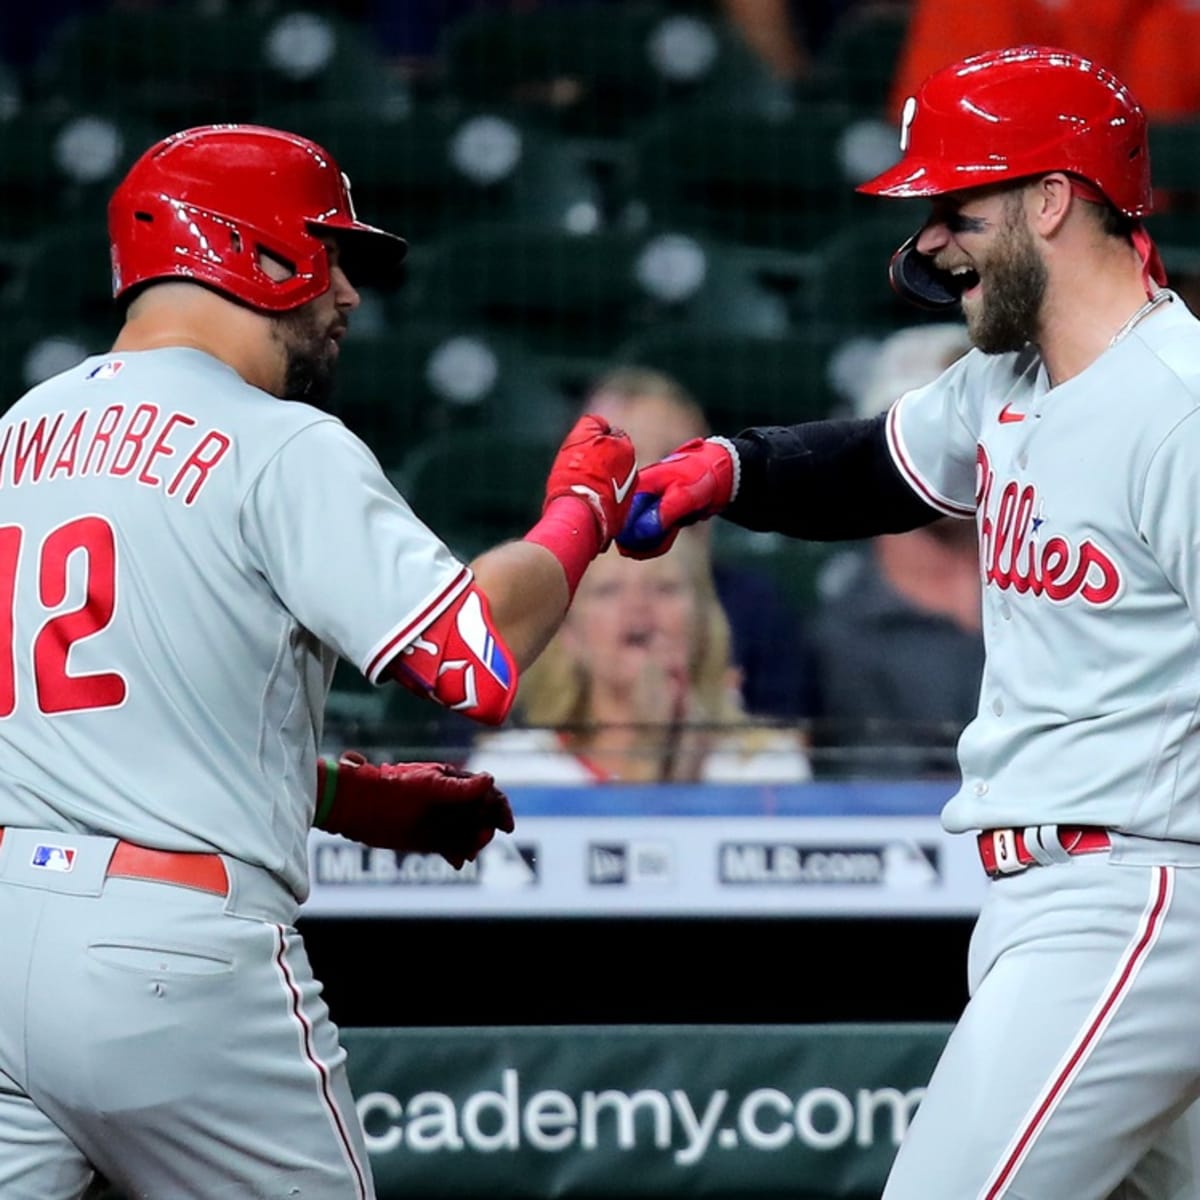 Phillies clinch playoff berth with win over Astros